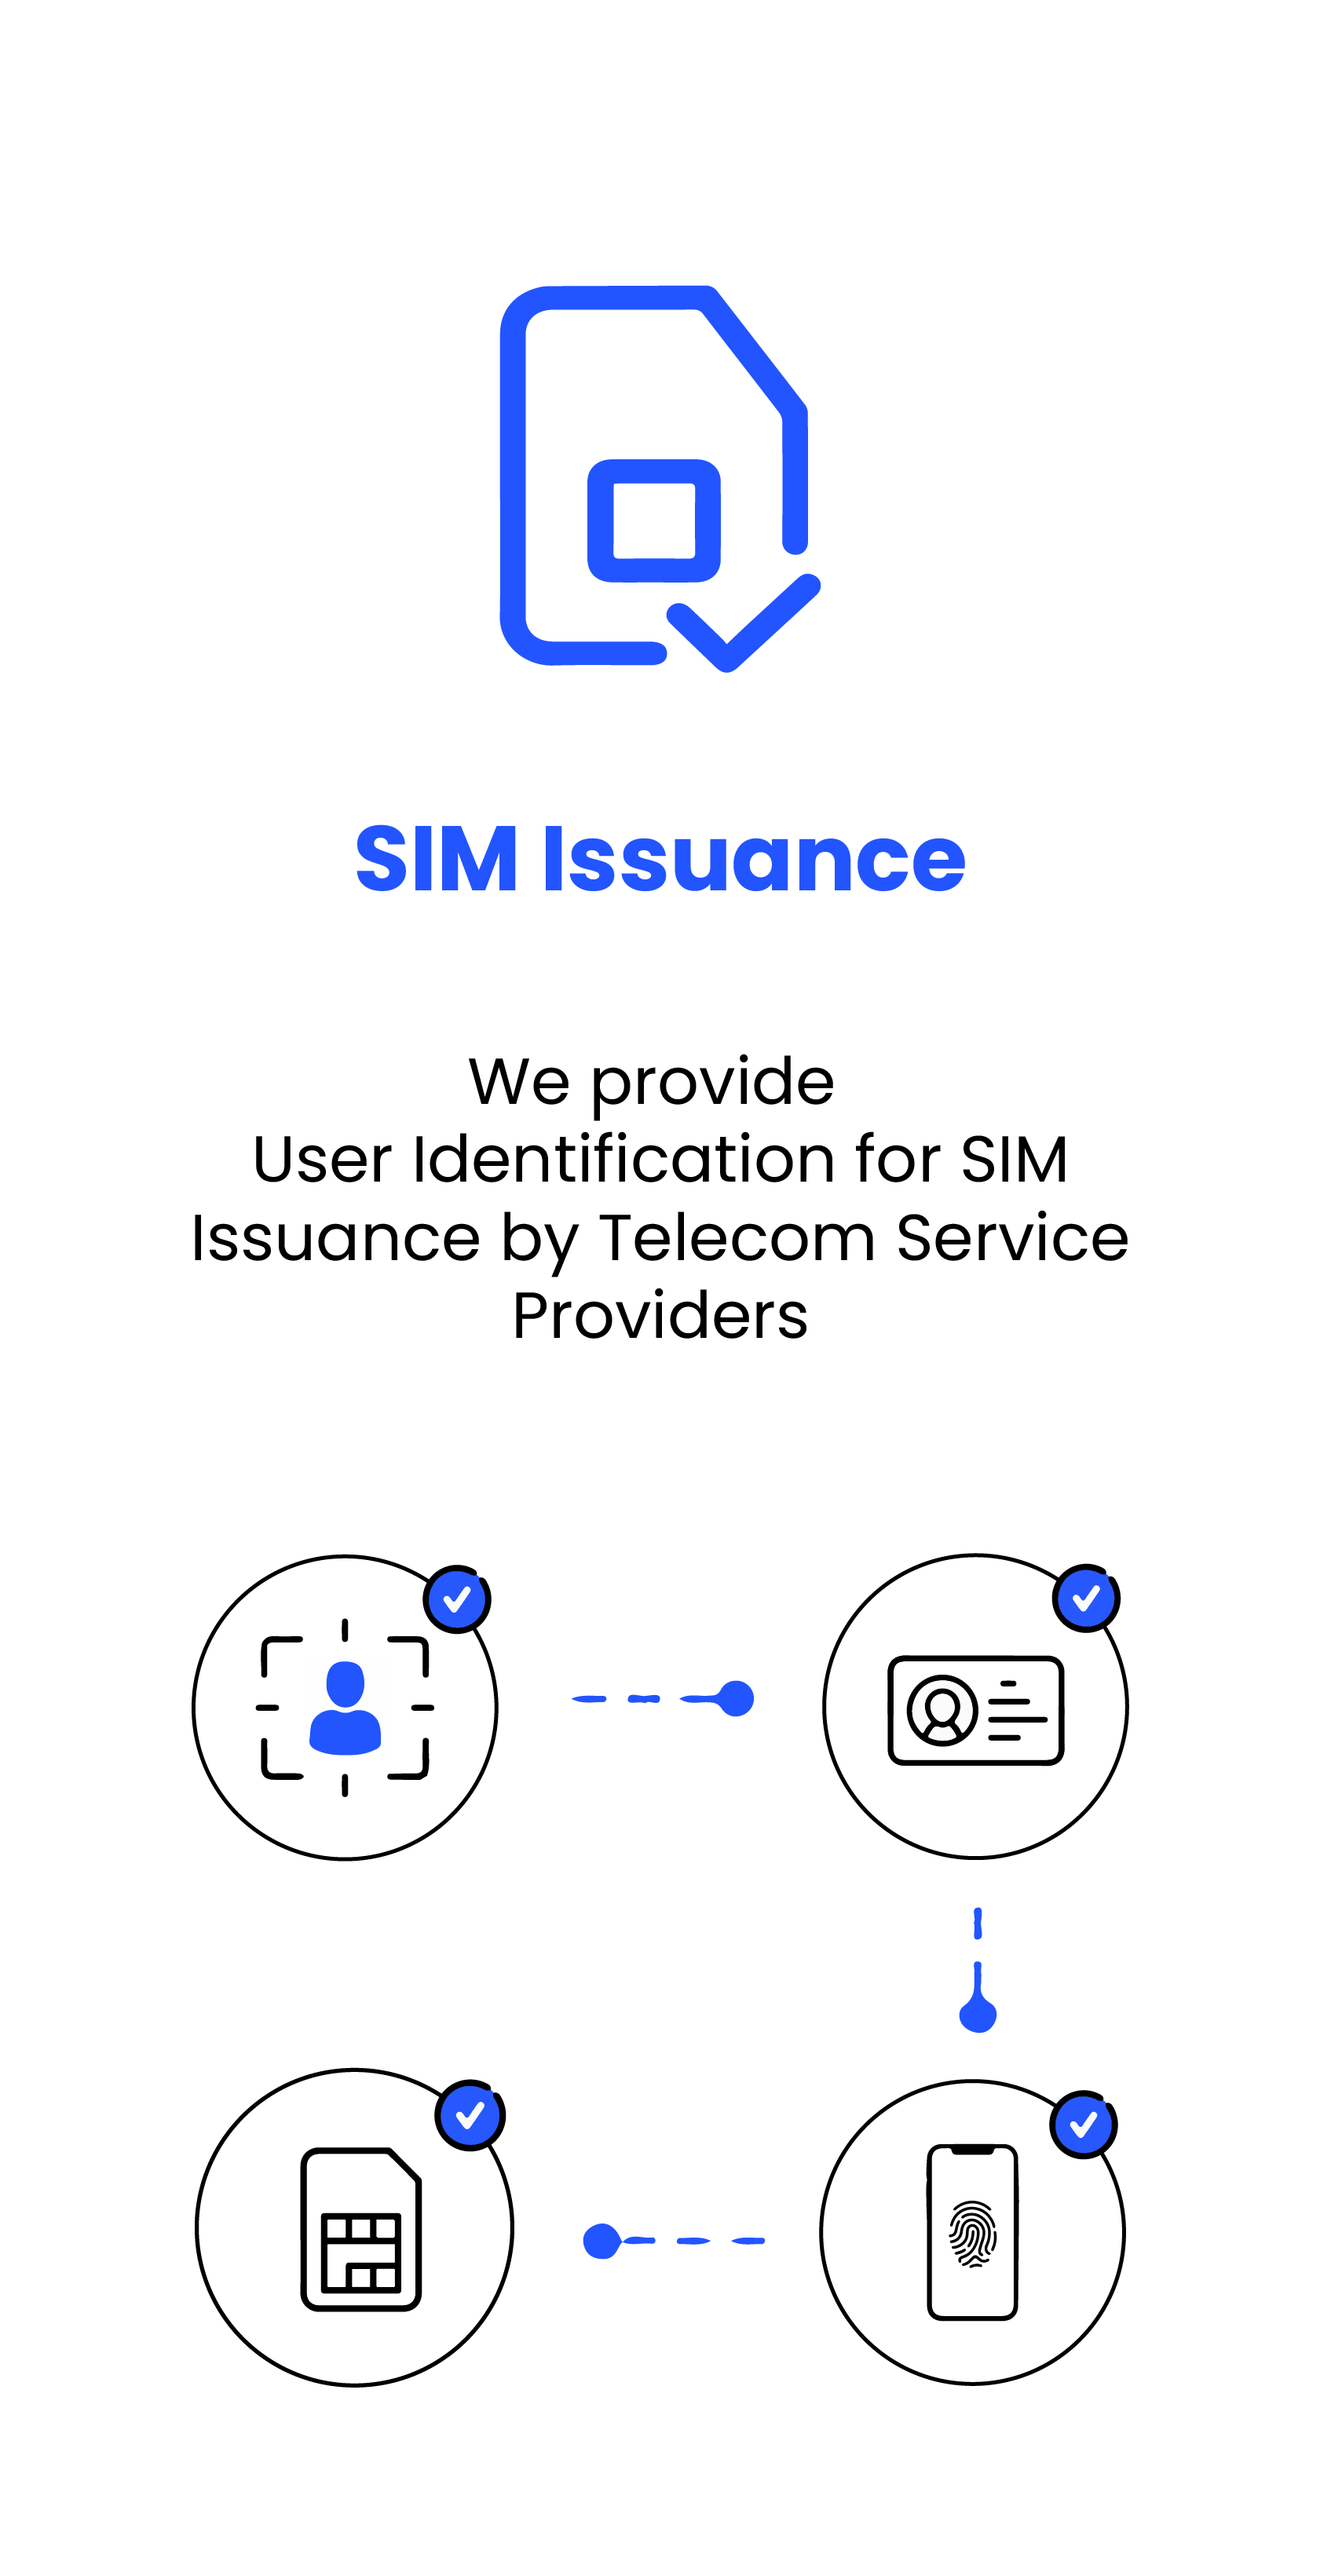 SIM issuance